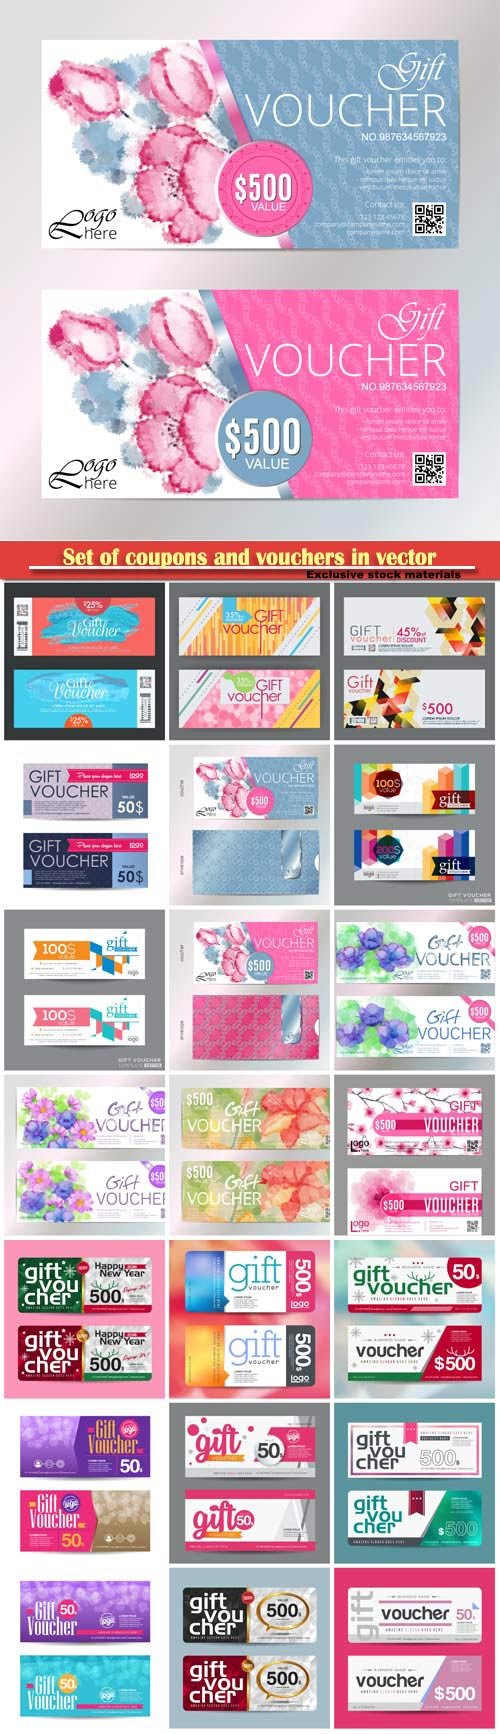 Set of coupons and vouchers in vector